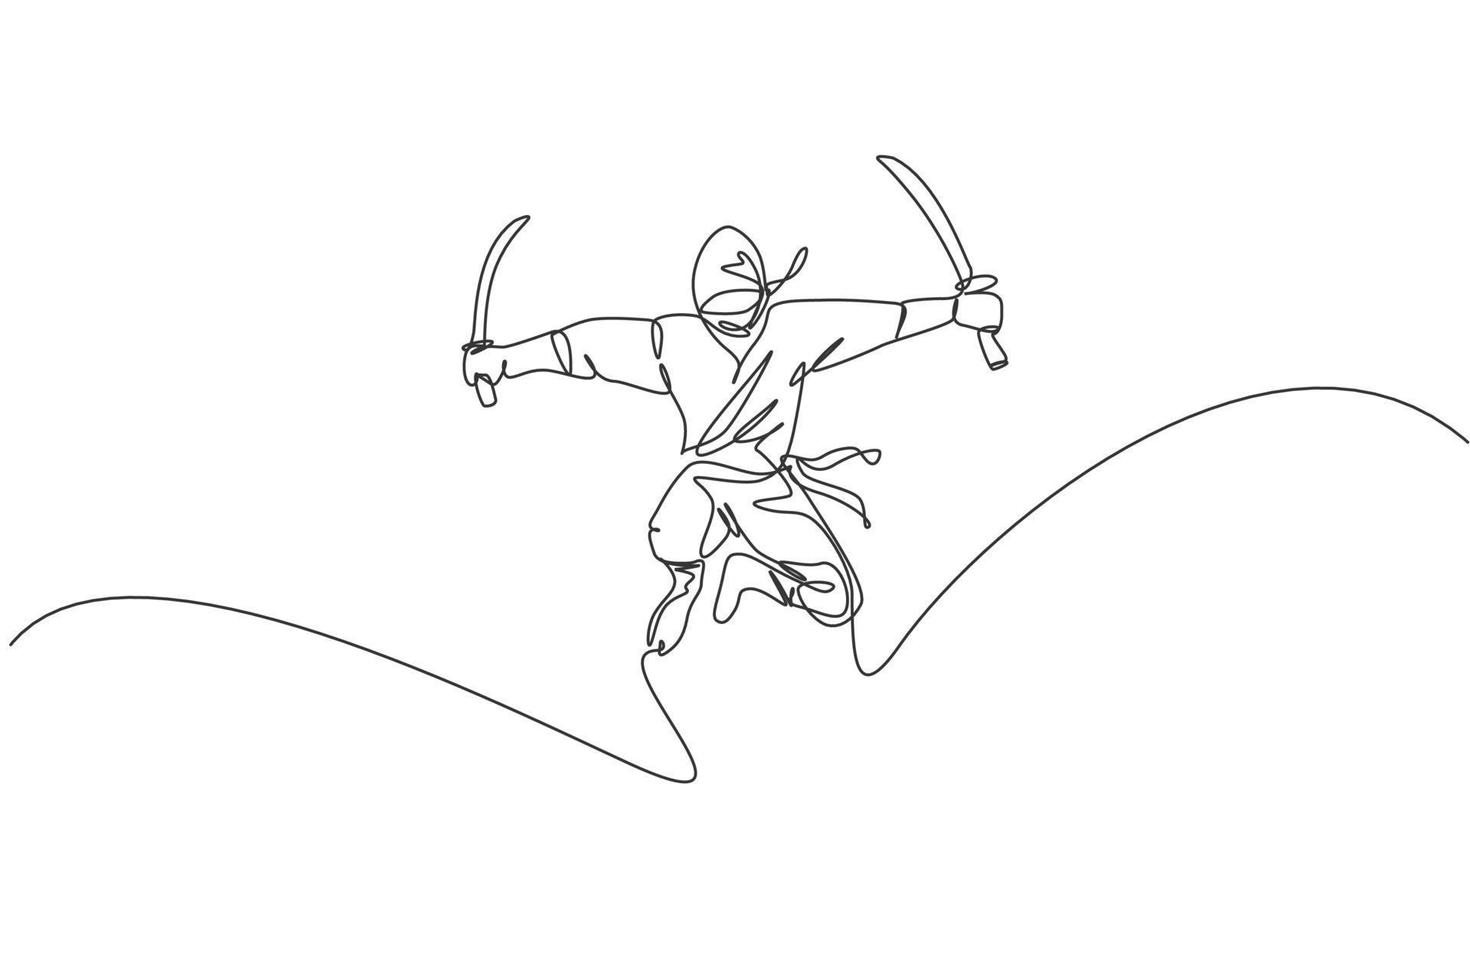 Single continuous line drawing of young Japanese culture ninja warrior on mask costume with jumping attack pose. Martial art fighting samurai concept. Trendy one line draw design vector illustration